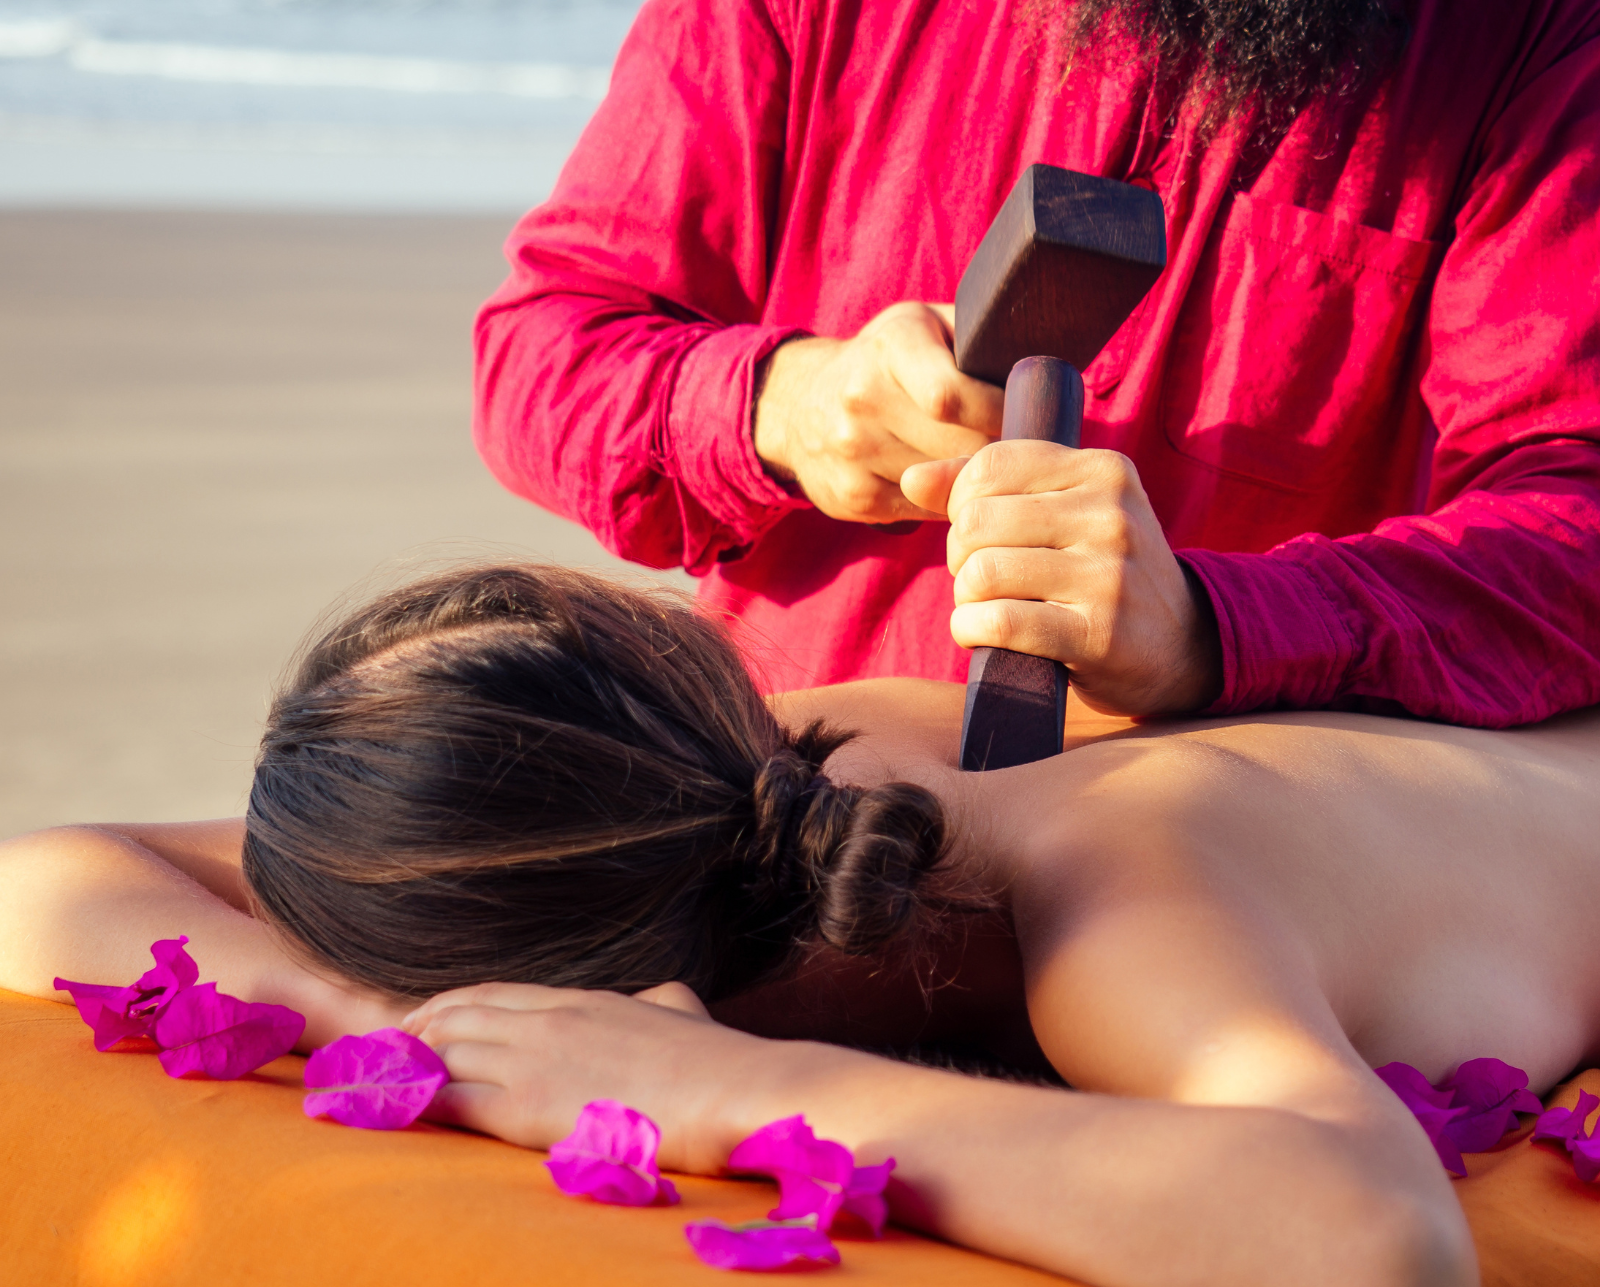 Tok-Sen_is_an_ancient_Thai_Massage_that_involves_the_use_of_a_special_wooden_hammer_to_relax_muscles_in_a_rhythmically_tapping_motion